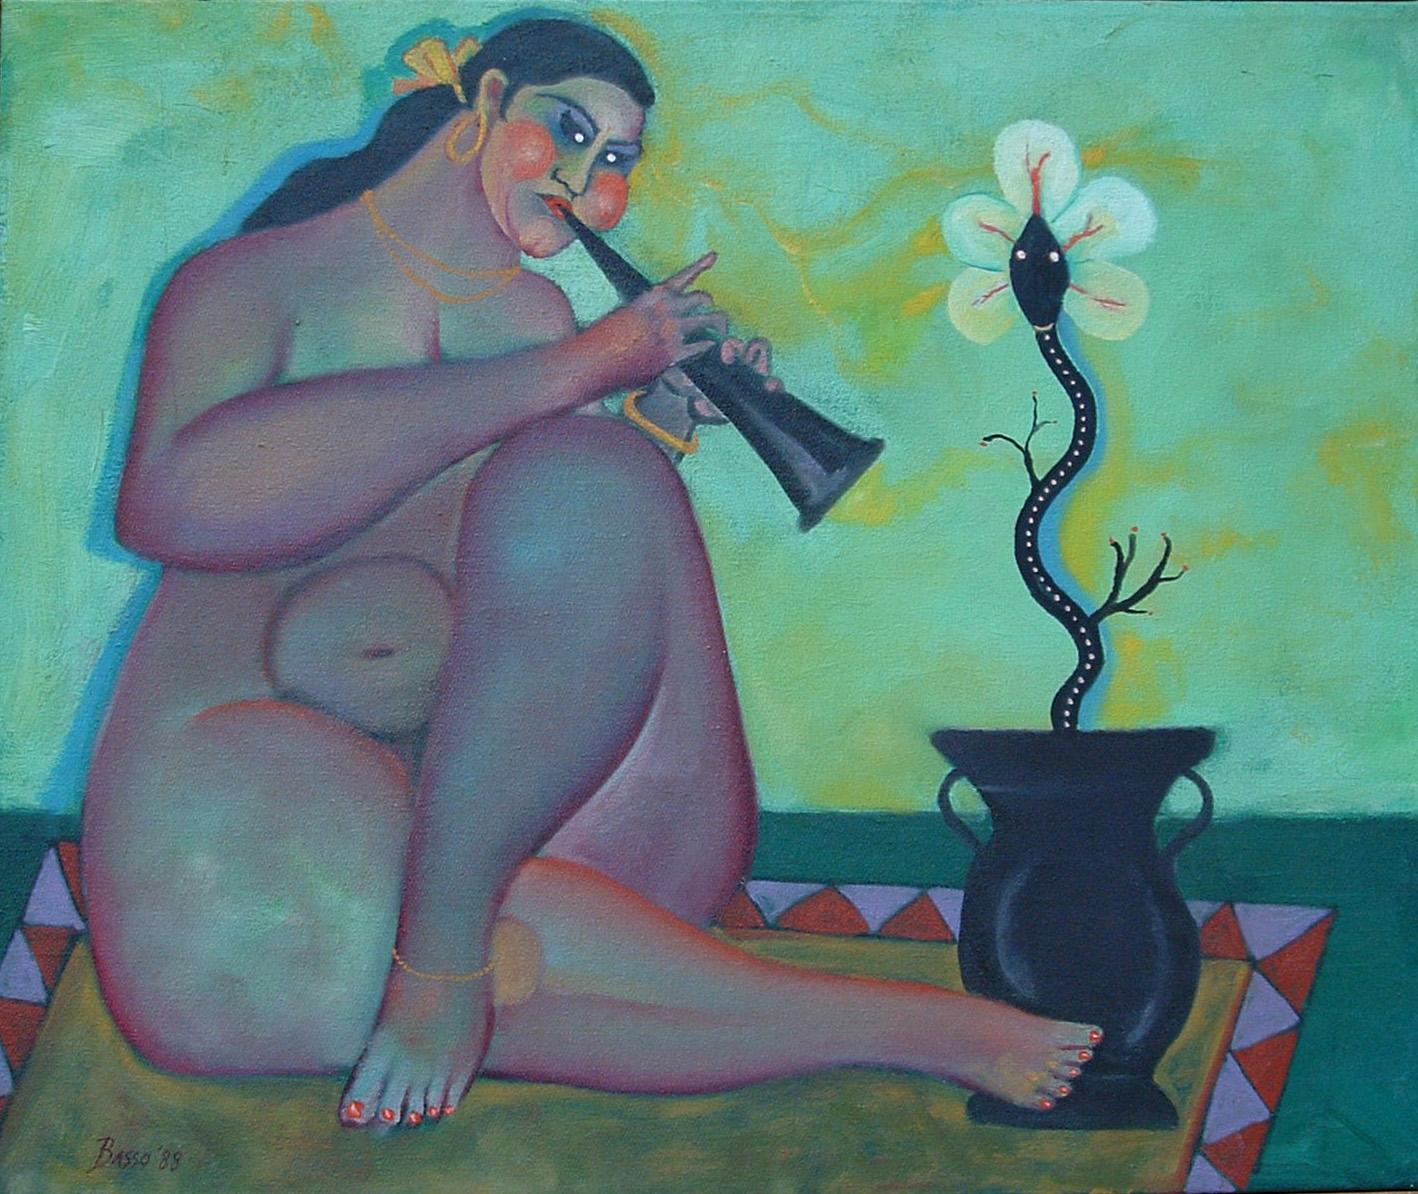 Stephen Basso Nude Painting - Snake Charmer  warm sunny greens colorful mythic music theme female nude